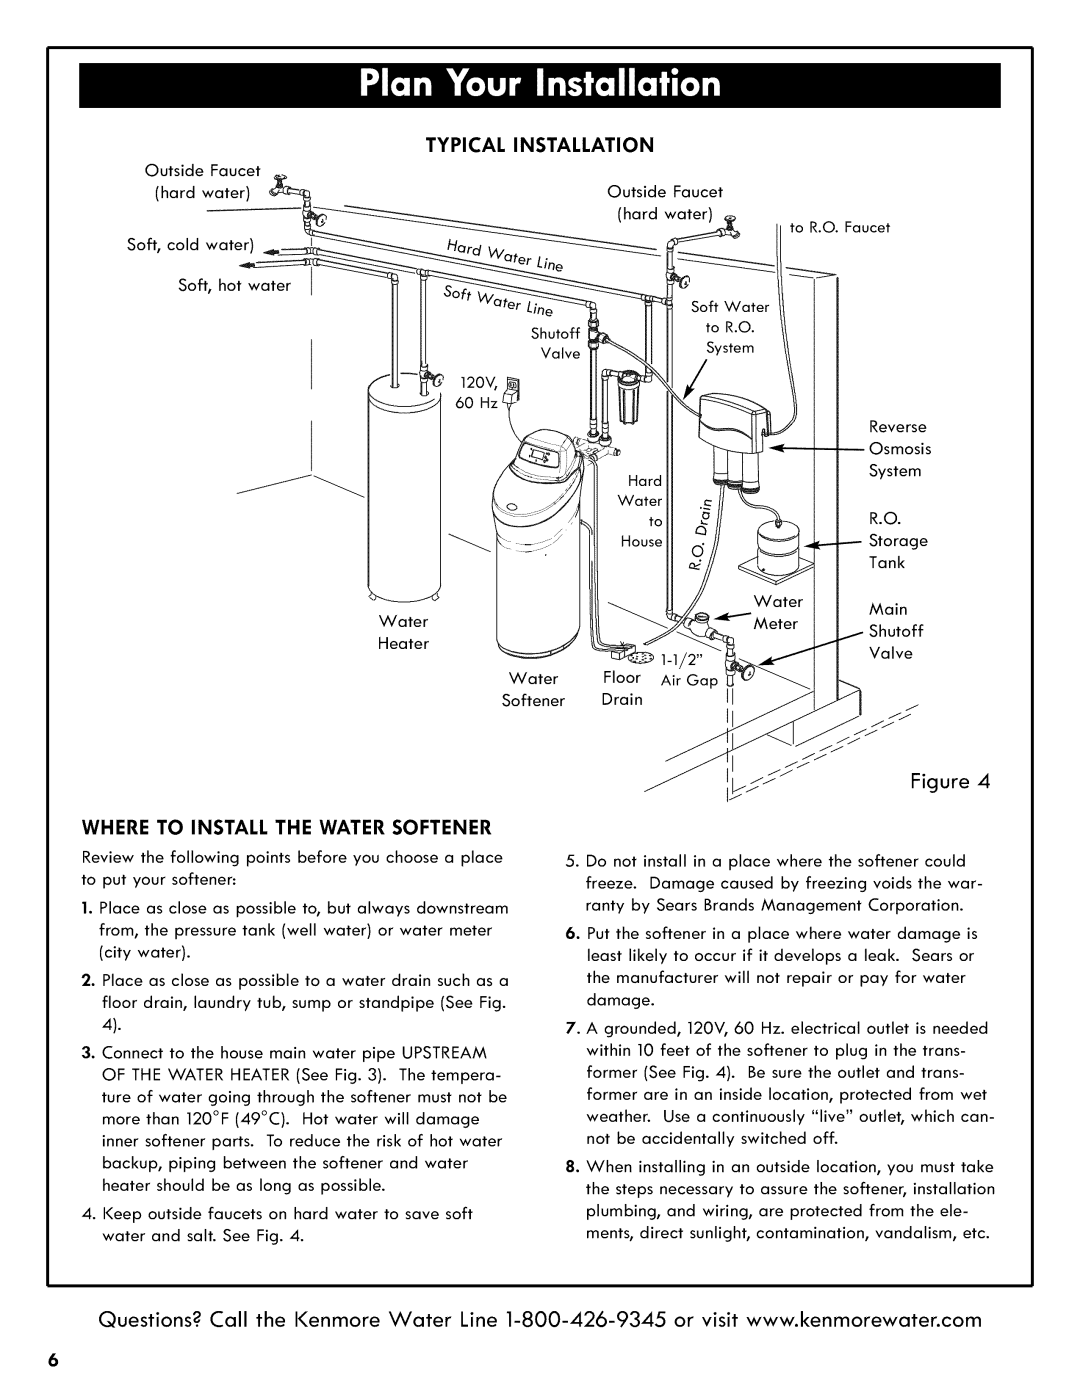 Kenmore 625.3835 manual Typical Installation, Where To Install The Water Softener 